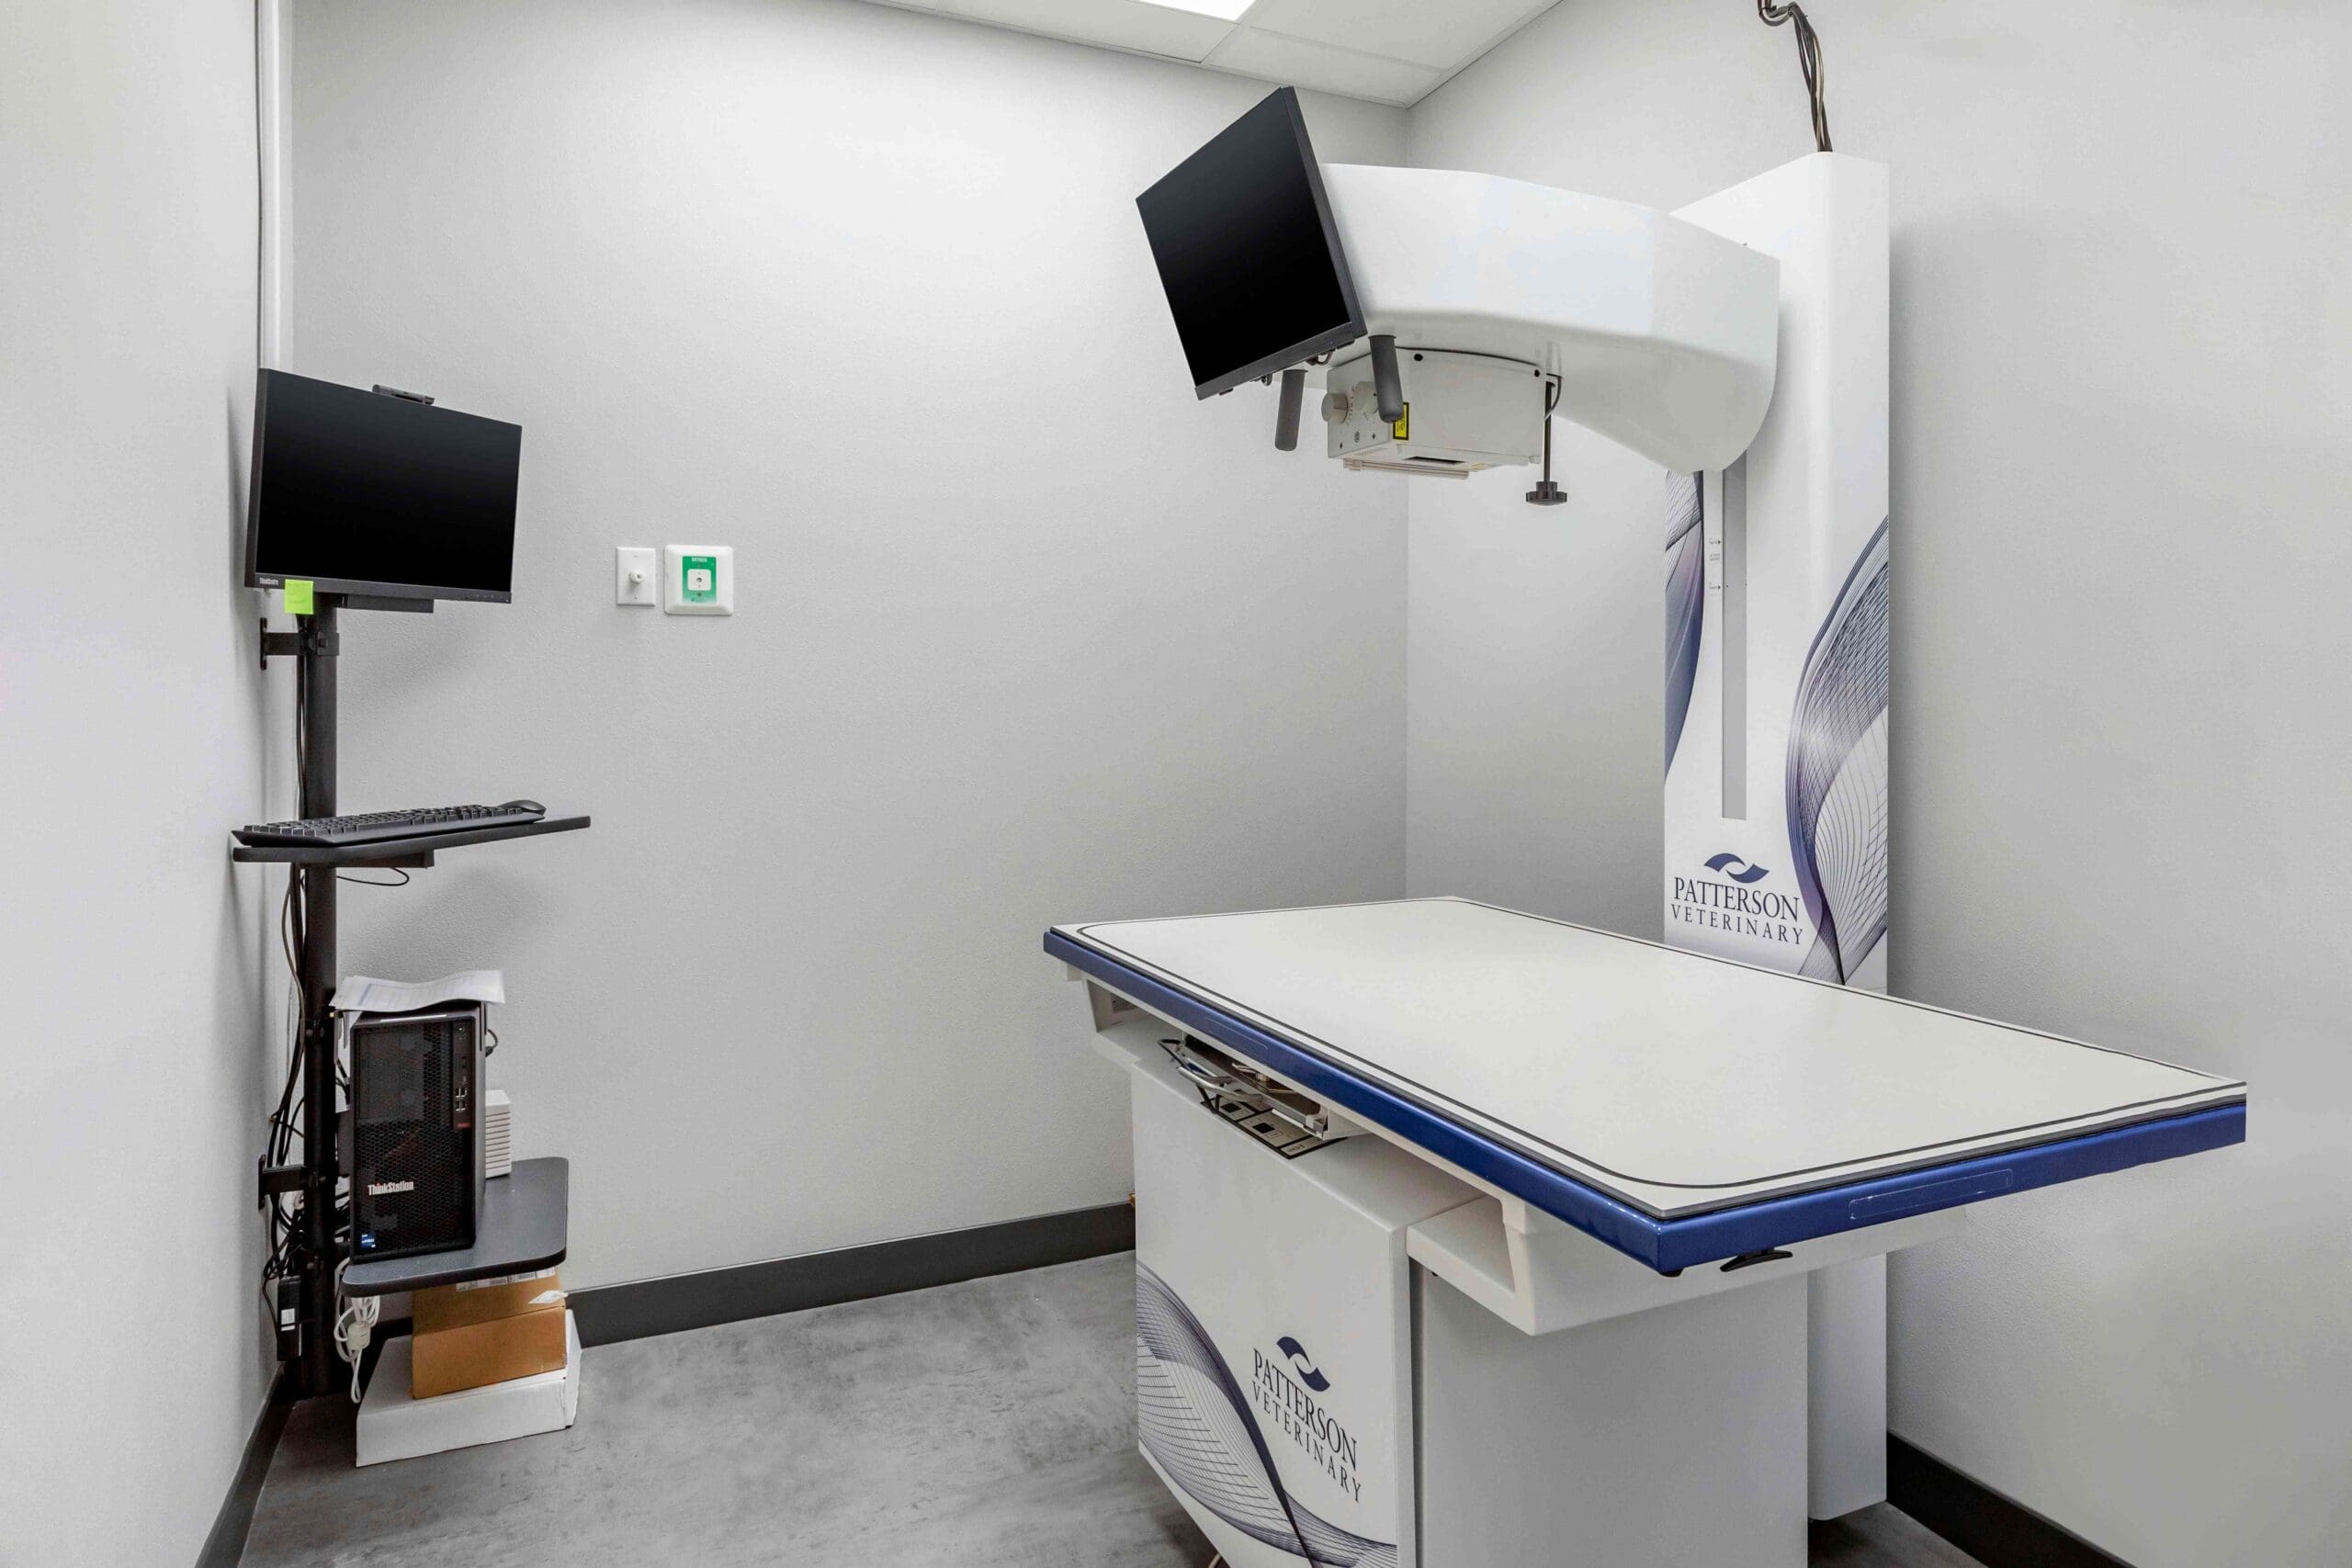 Exam room intended to take x-ray photos of pets